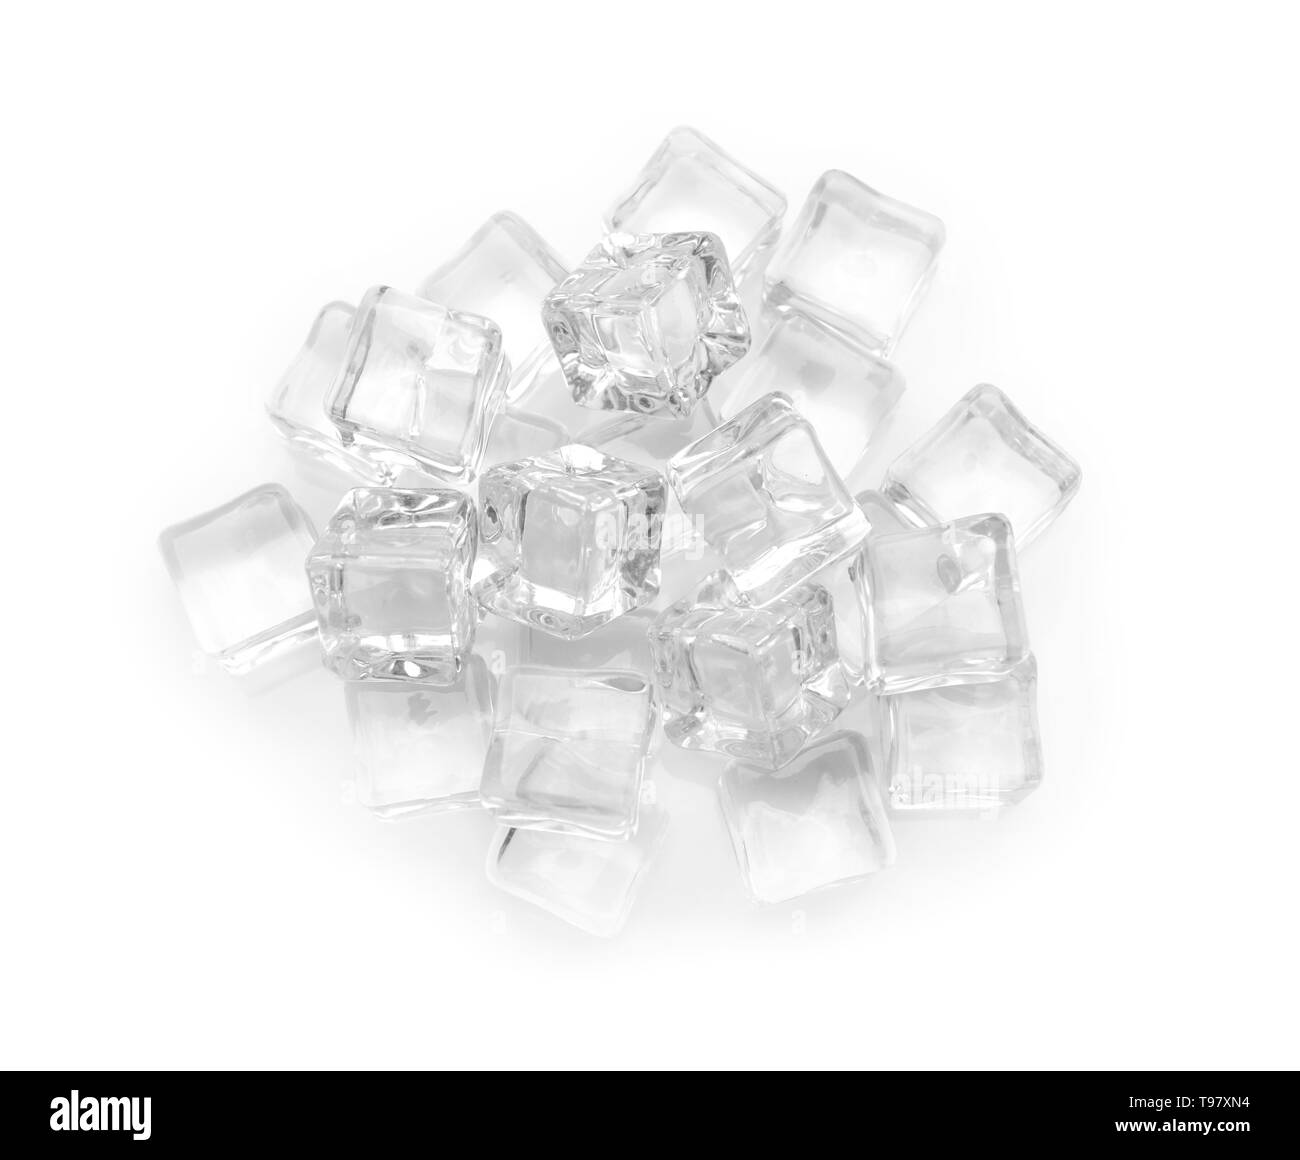 Wet crystals Black and White Stock Photos & Images - Alamy